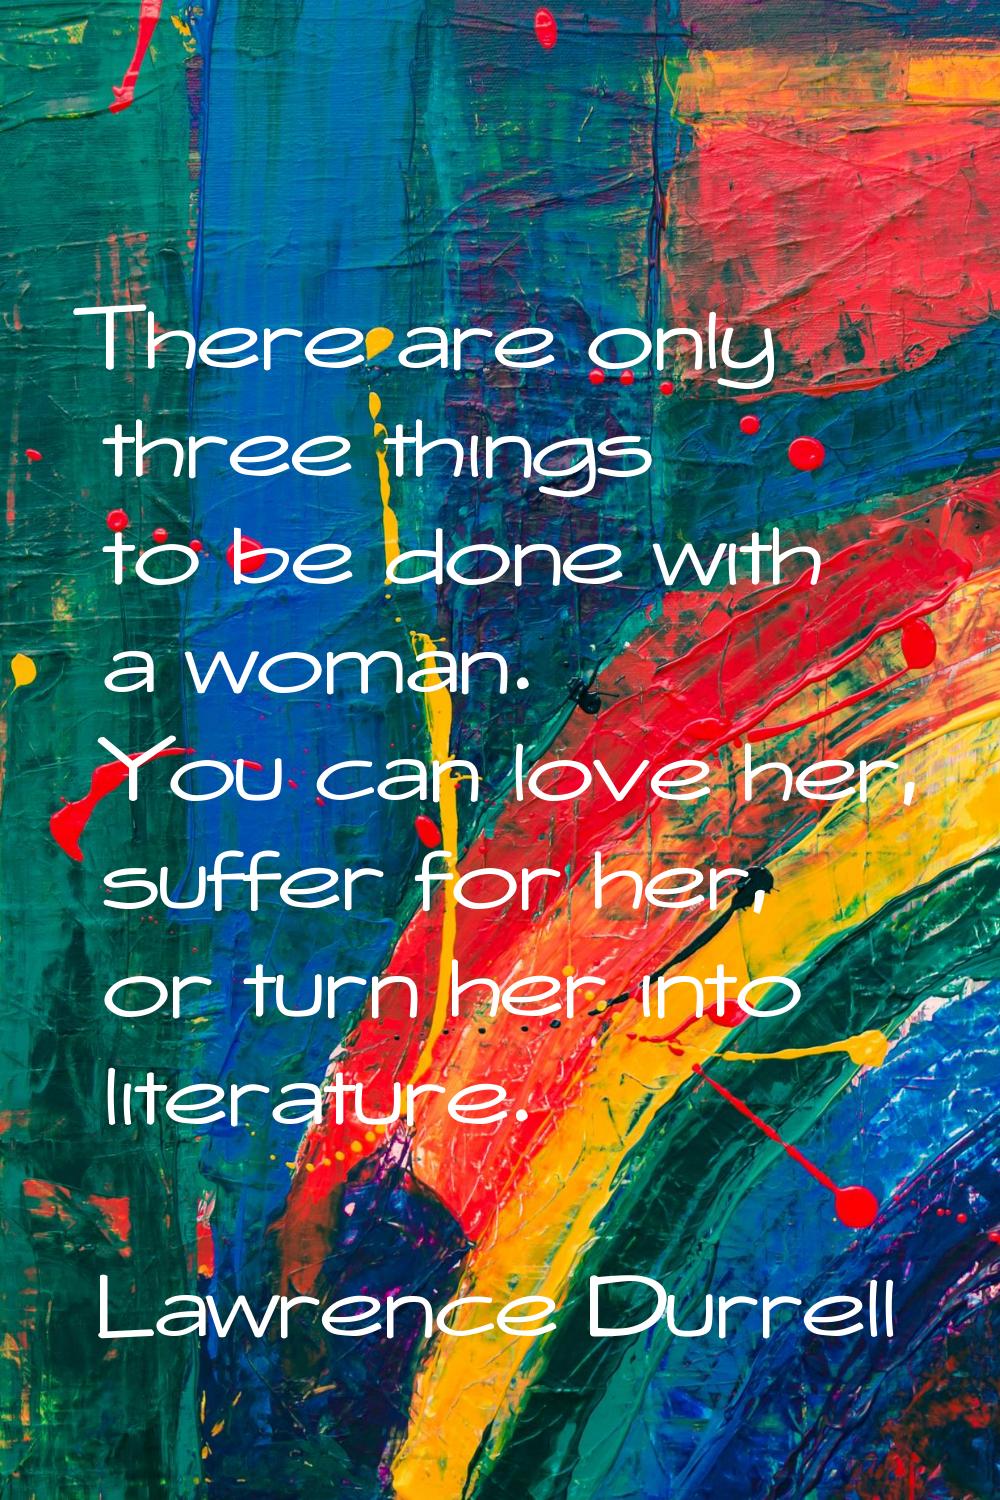 There are only three things to be done with a woman. You can love her, suffer for her, or turn her 